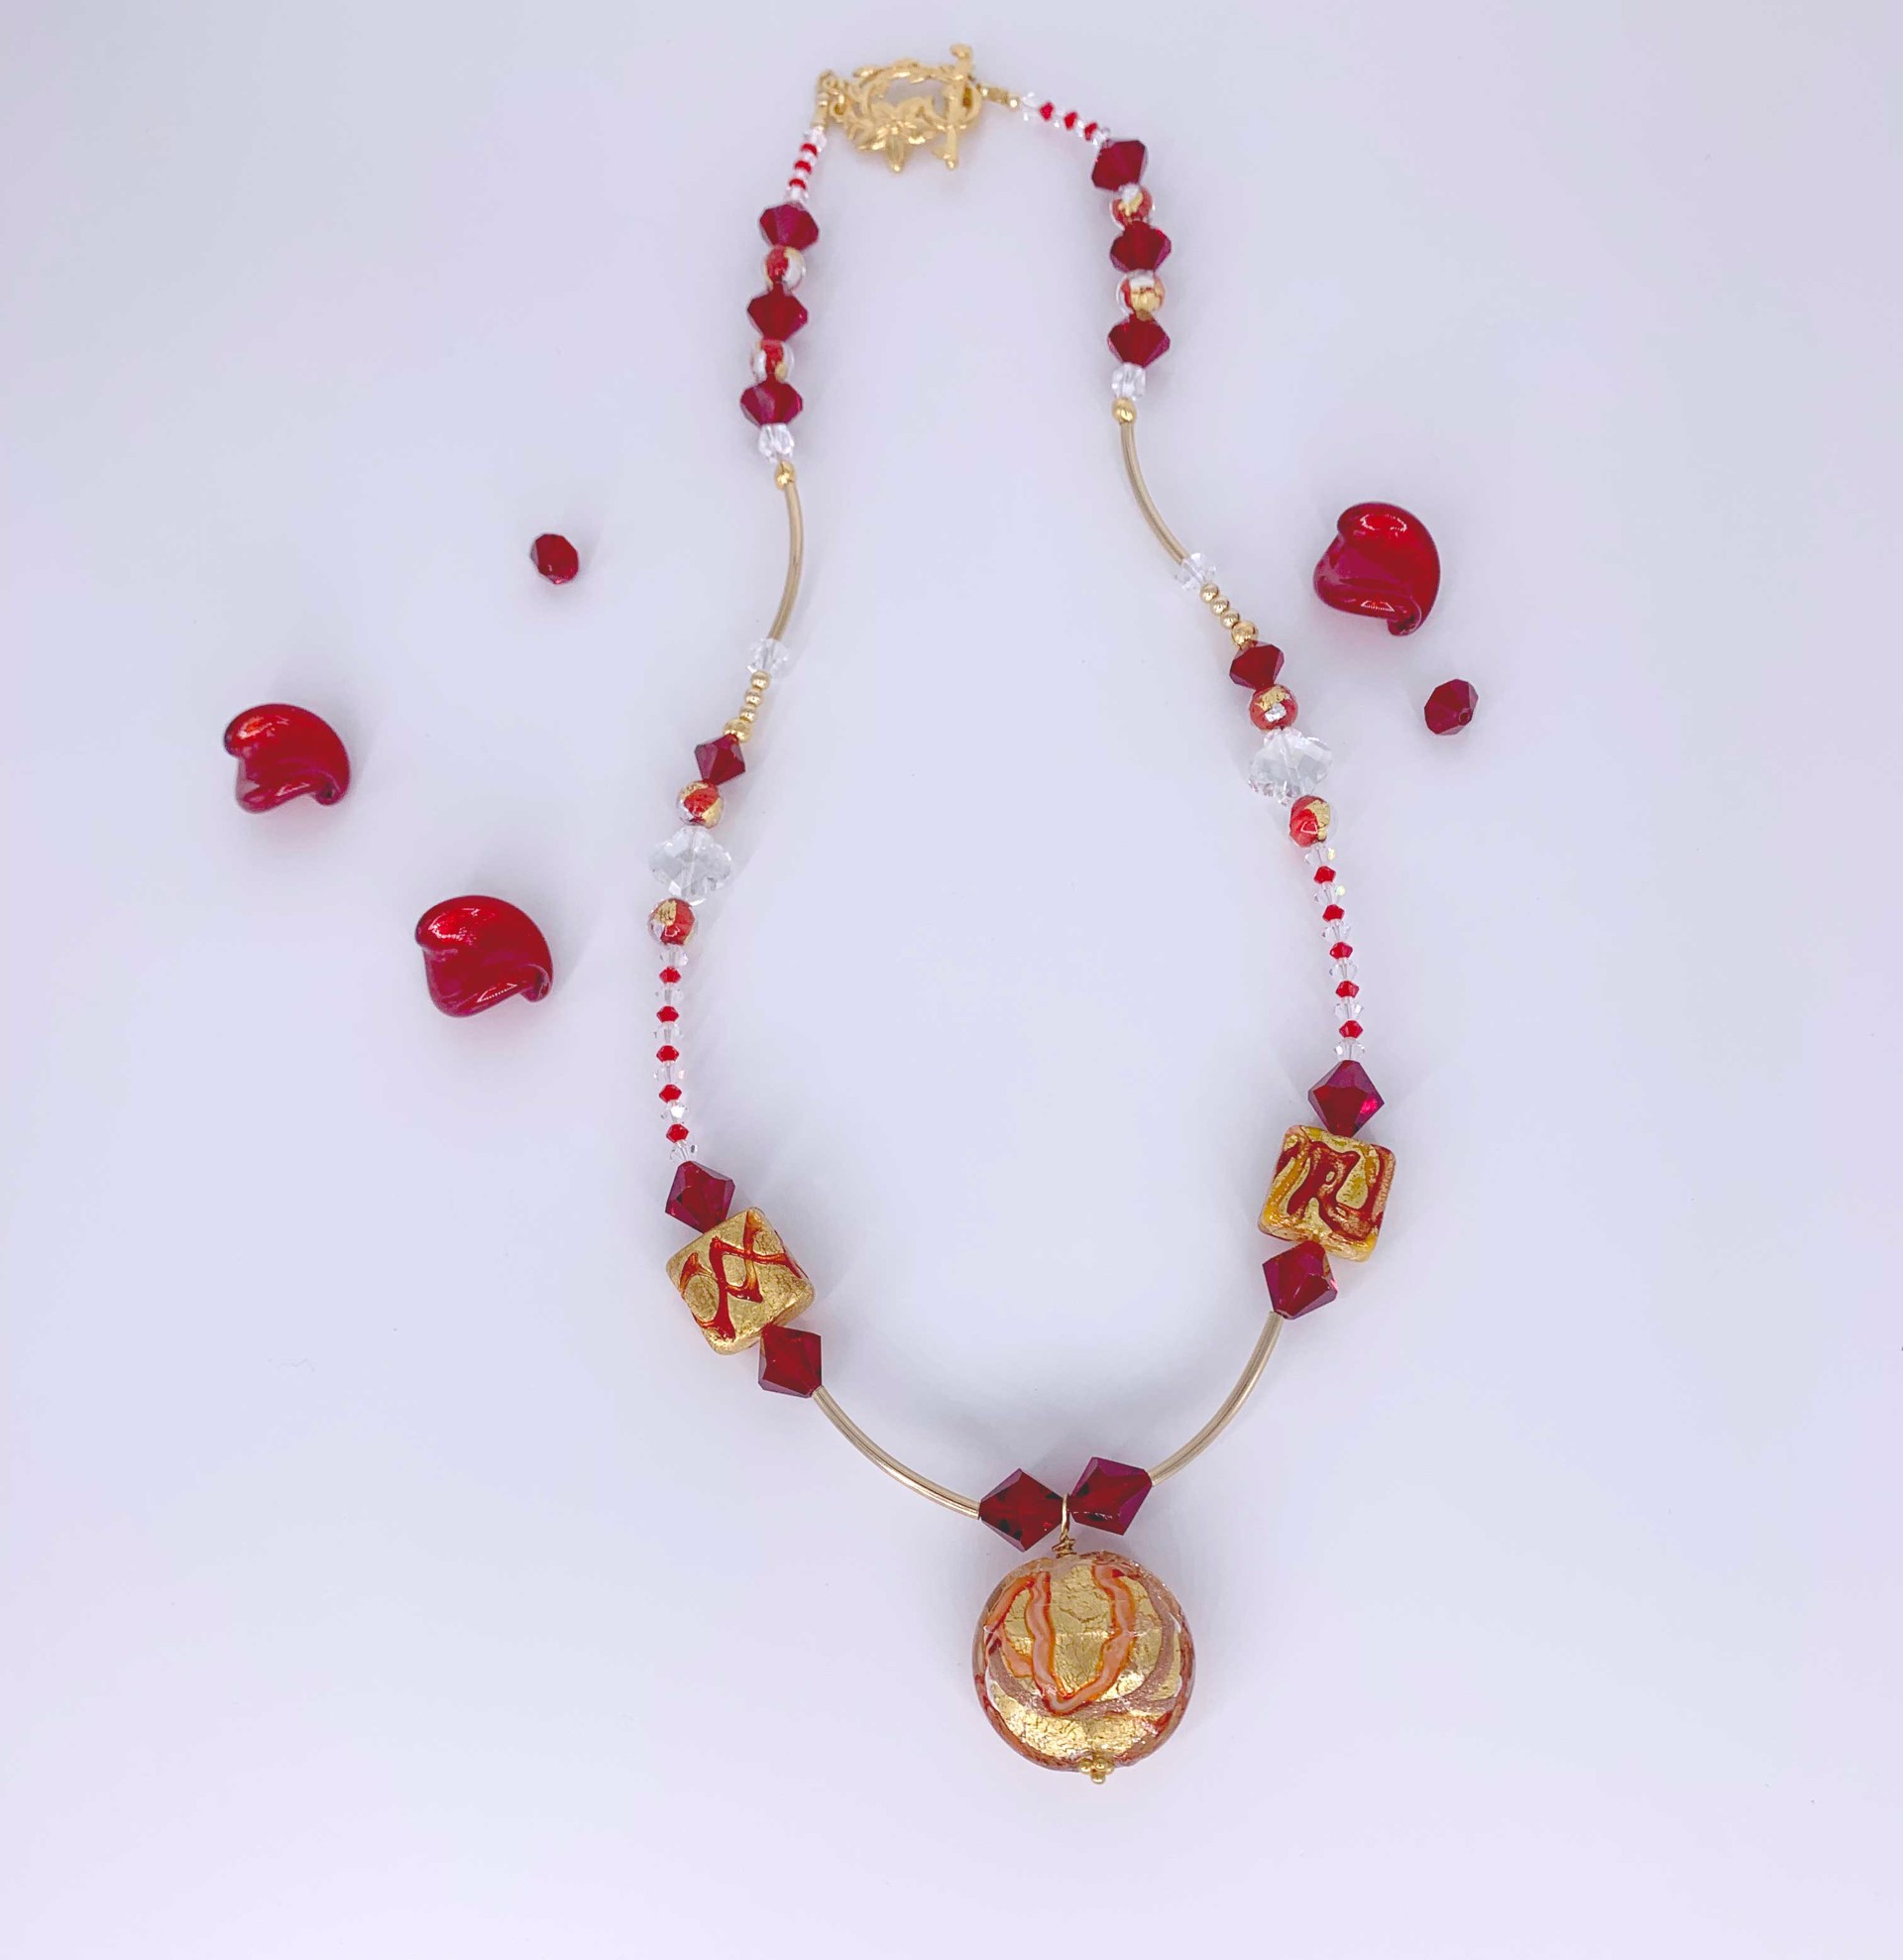 A dazzling red and gold necklace using handmade Venetian glass beads purchased in Murano, Italy, accompanied by Swarovski crystals and gold tube beads and clasp.